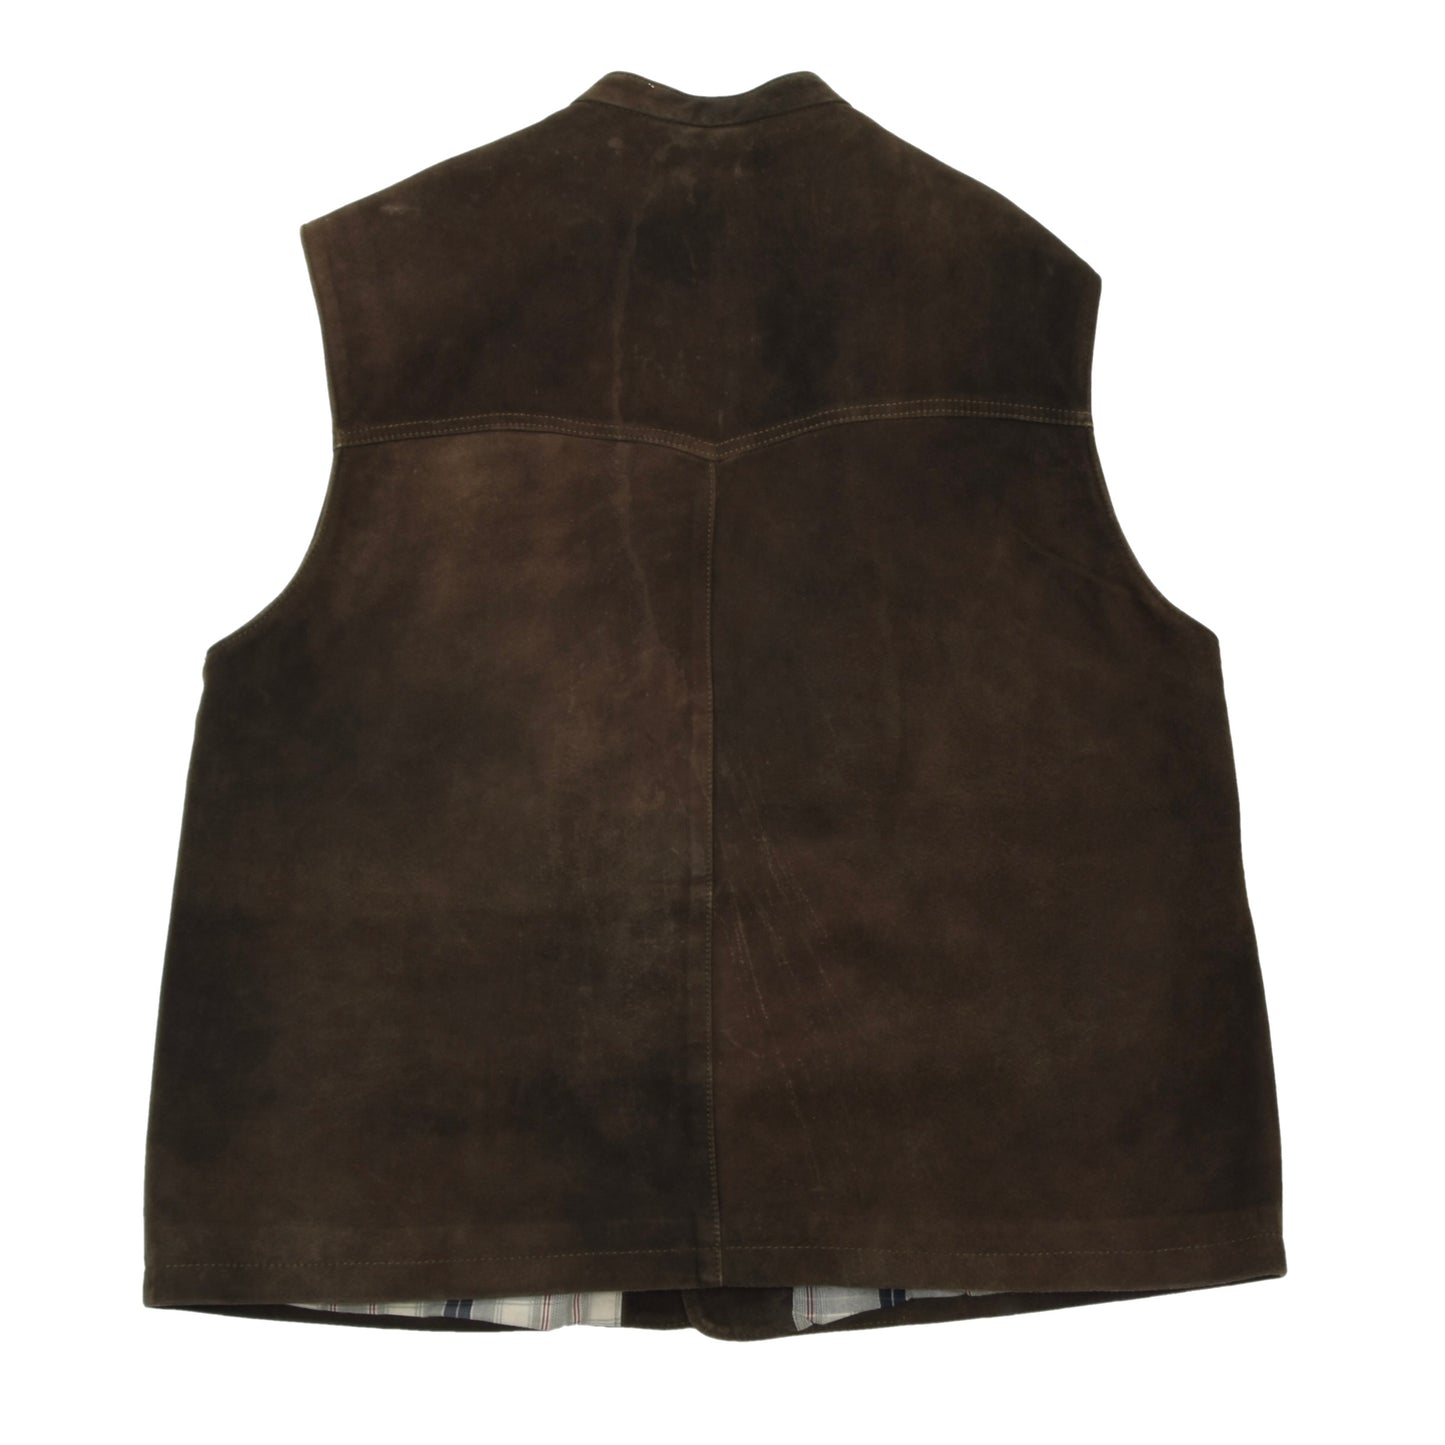 Meindl Suede Leather Vest Size 54 - Brown